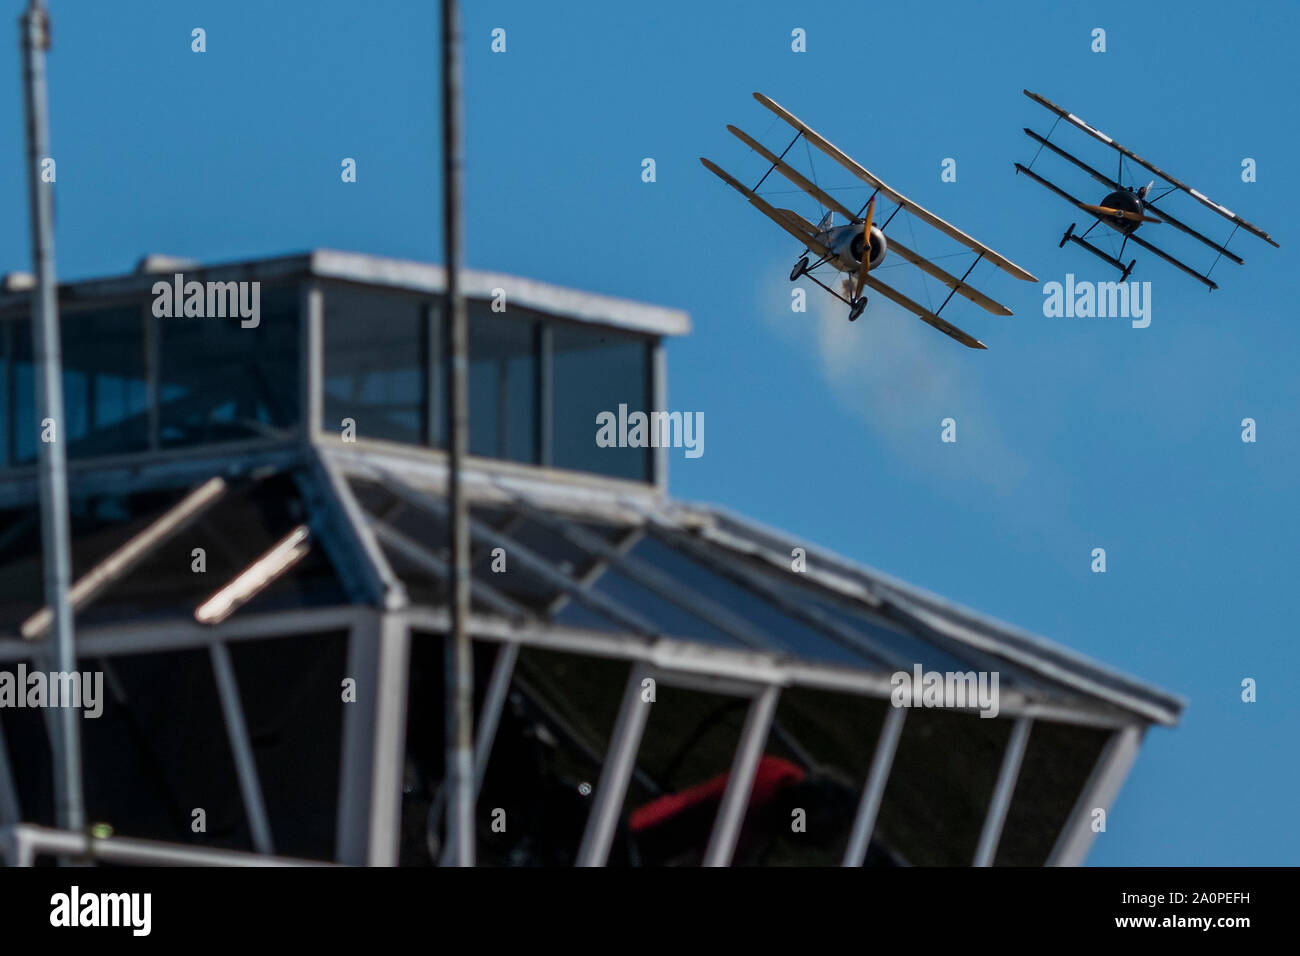 The Bremont Great War Display team simulate aerial combat in replica World War 1 planes - Duxford Battle of Britain Air Show at the Imperial War Museum. Also commemorating the 50th anniversary of the 1969 Battle of Britain film. It runs on Saturday 21 & Sunday 22 September 2019 Credit: Guy Bell/Alamy Live News Stock Photo